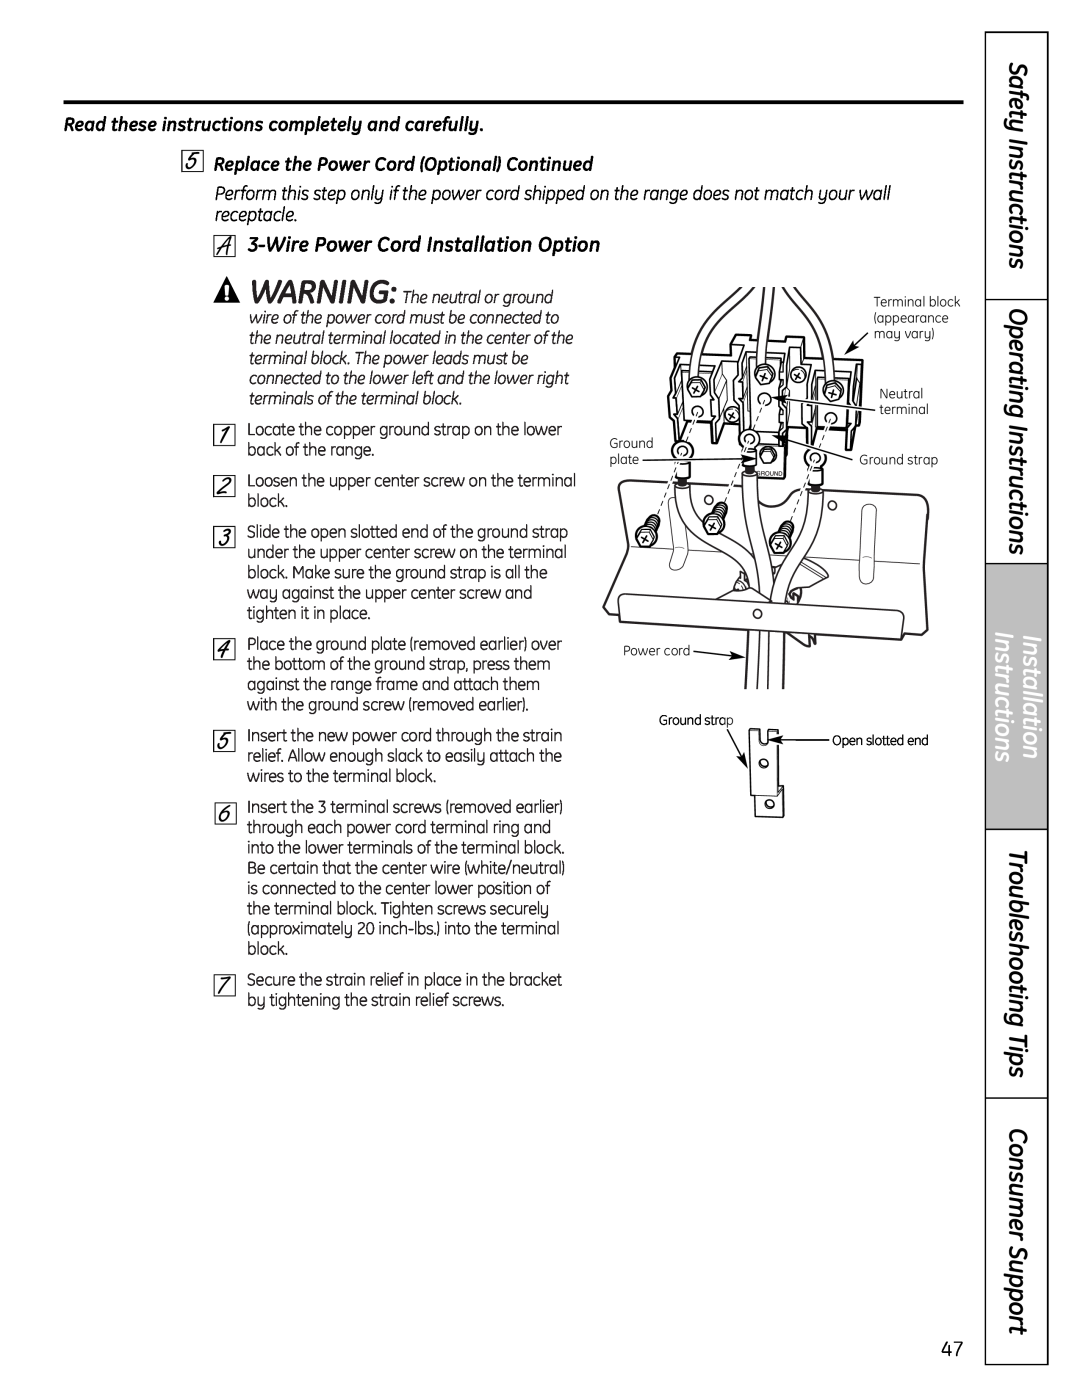 GE P2B918 Wire Power Cord Installation Option, Replace the Power Cord Optional Continued, Operating Instructions 